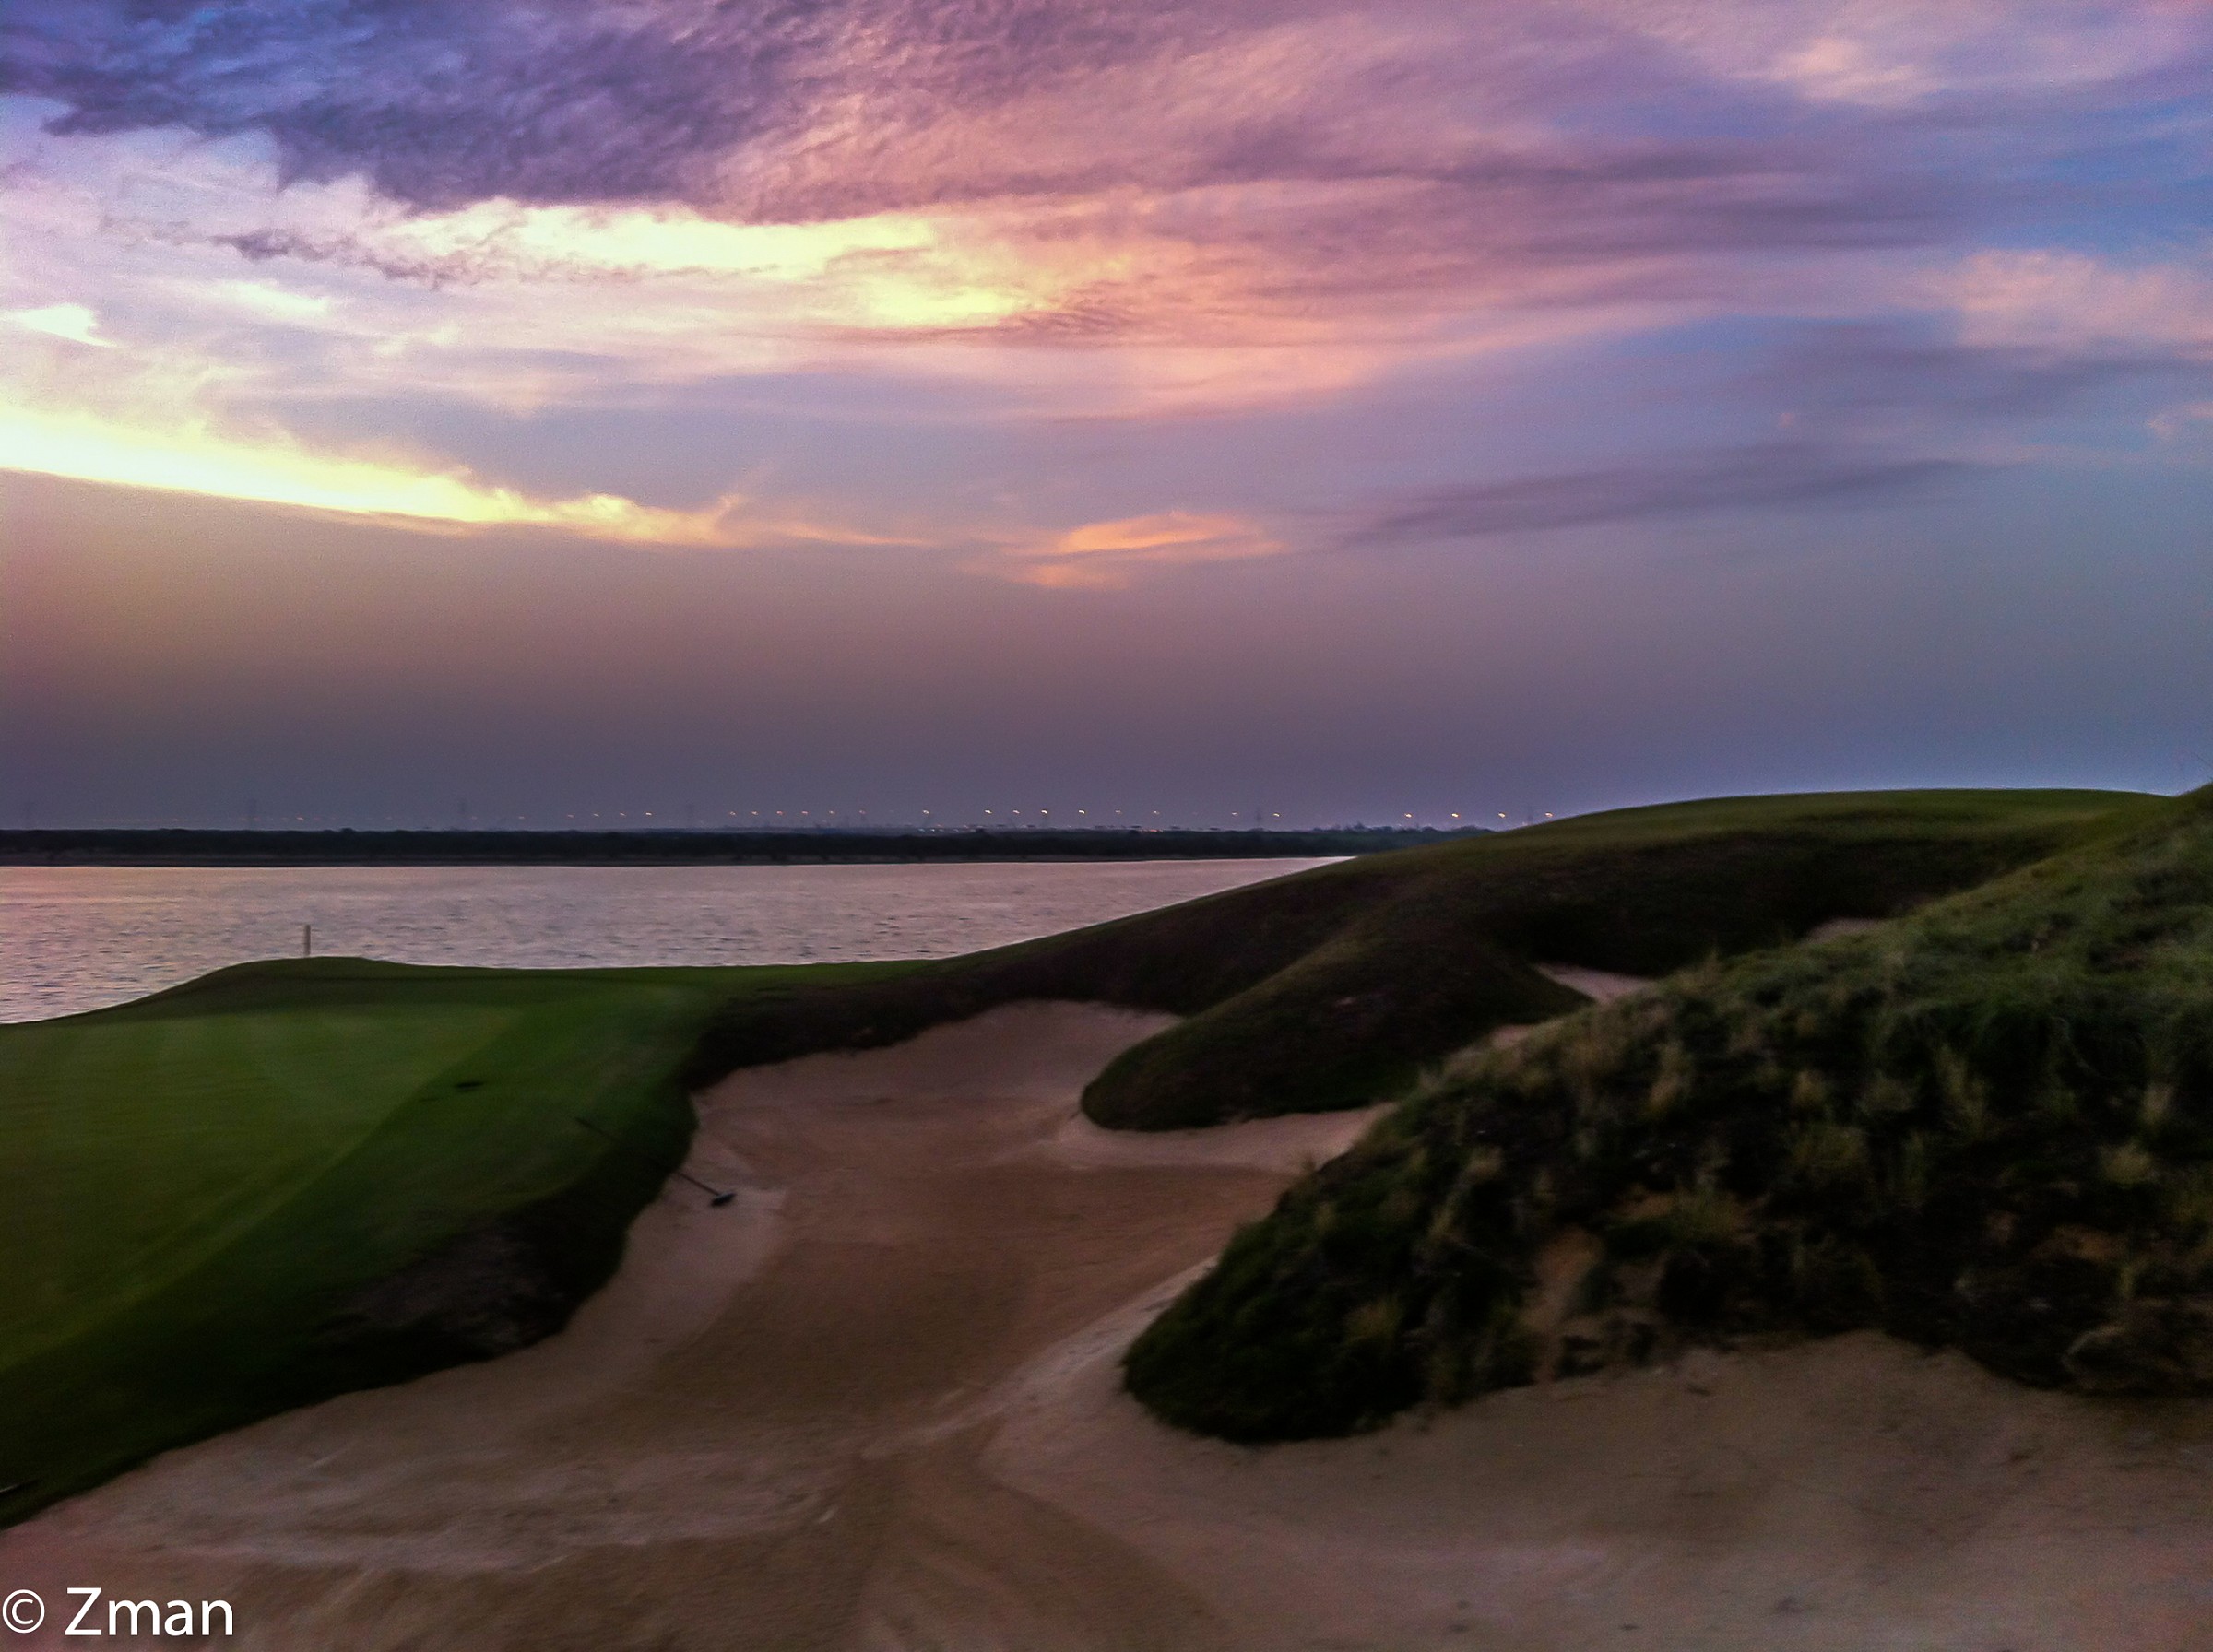 Sunset from The Fairway, Yas Links...